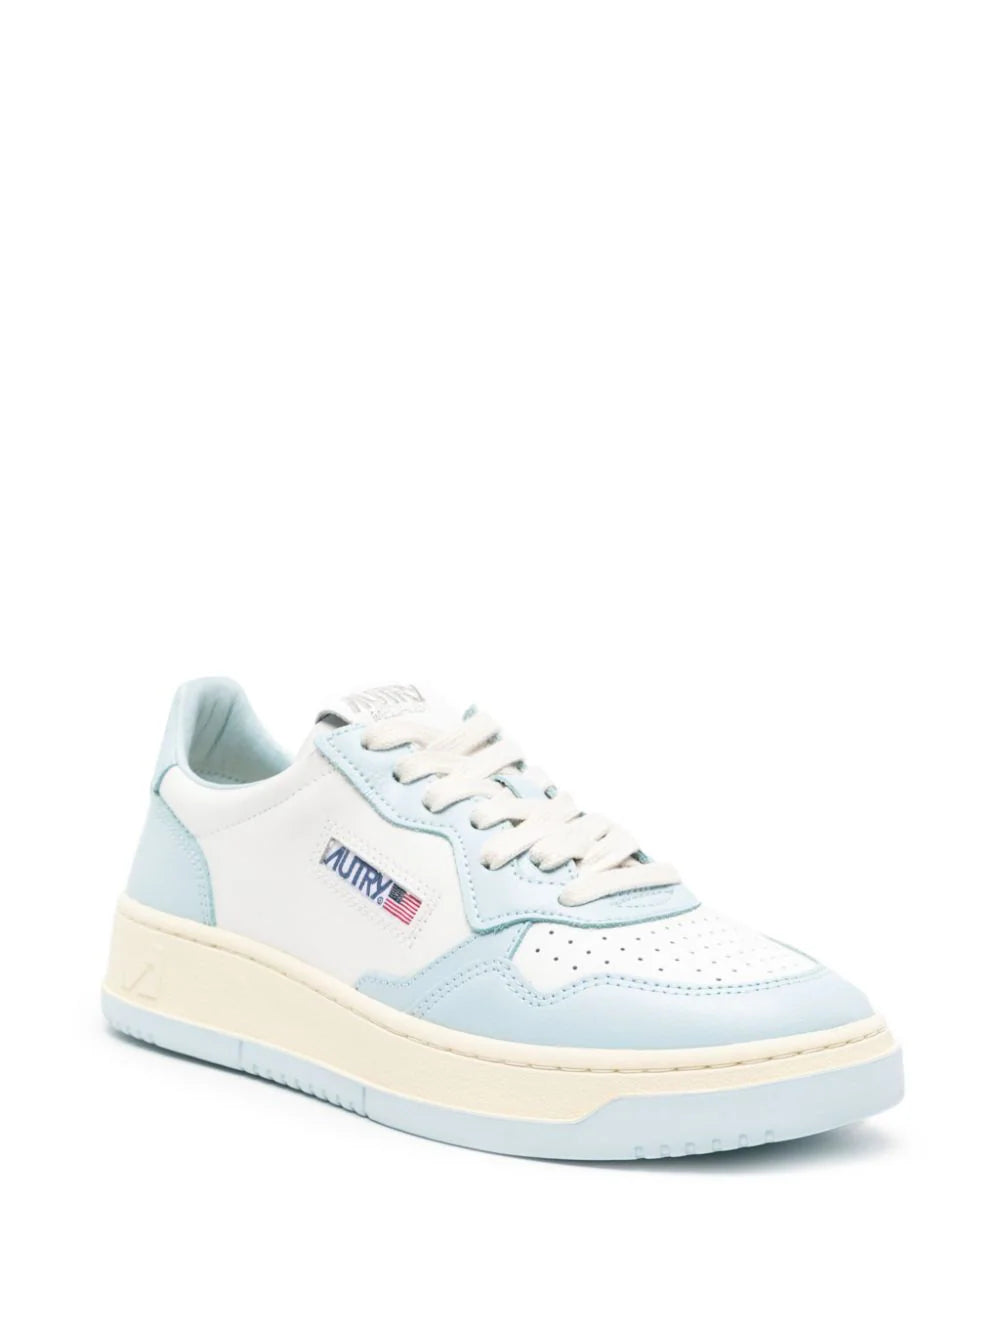 Medalist low sneakers, white/blue